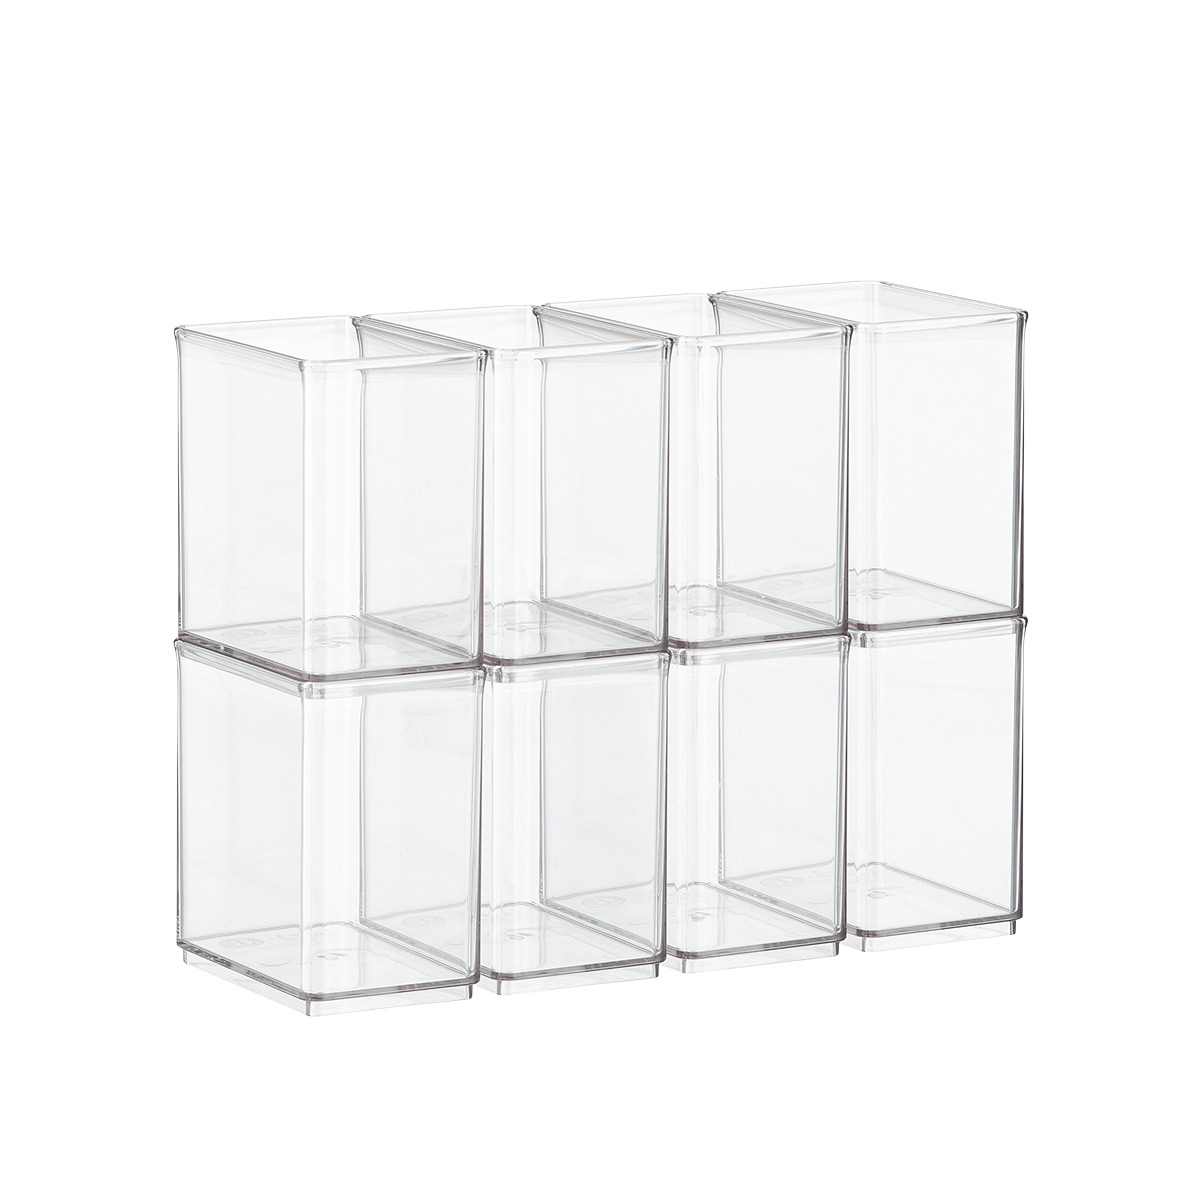 https://www.containerstore.com/catalogimages/406652/10082471-The-Home-Edit-tall-bin-orga.jpg